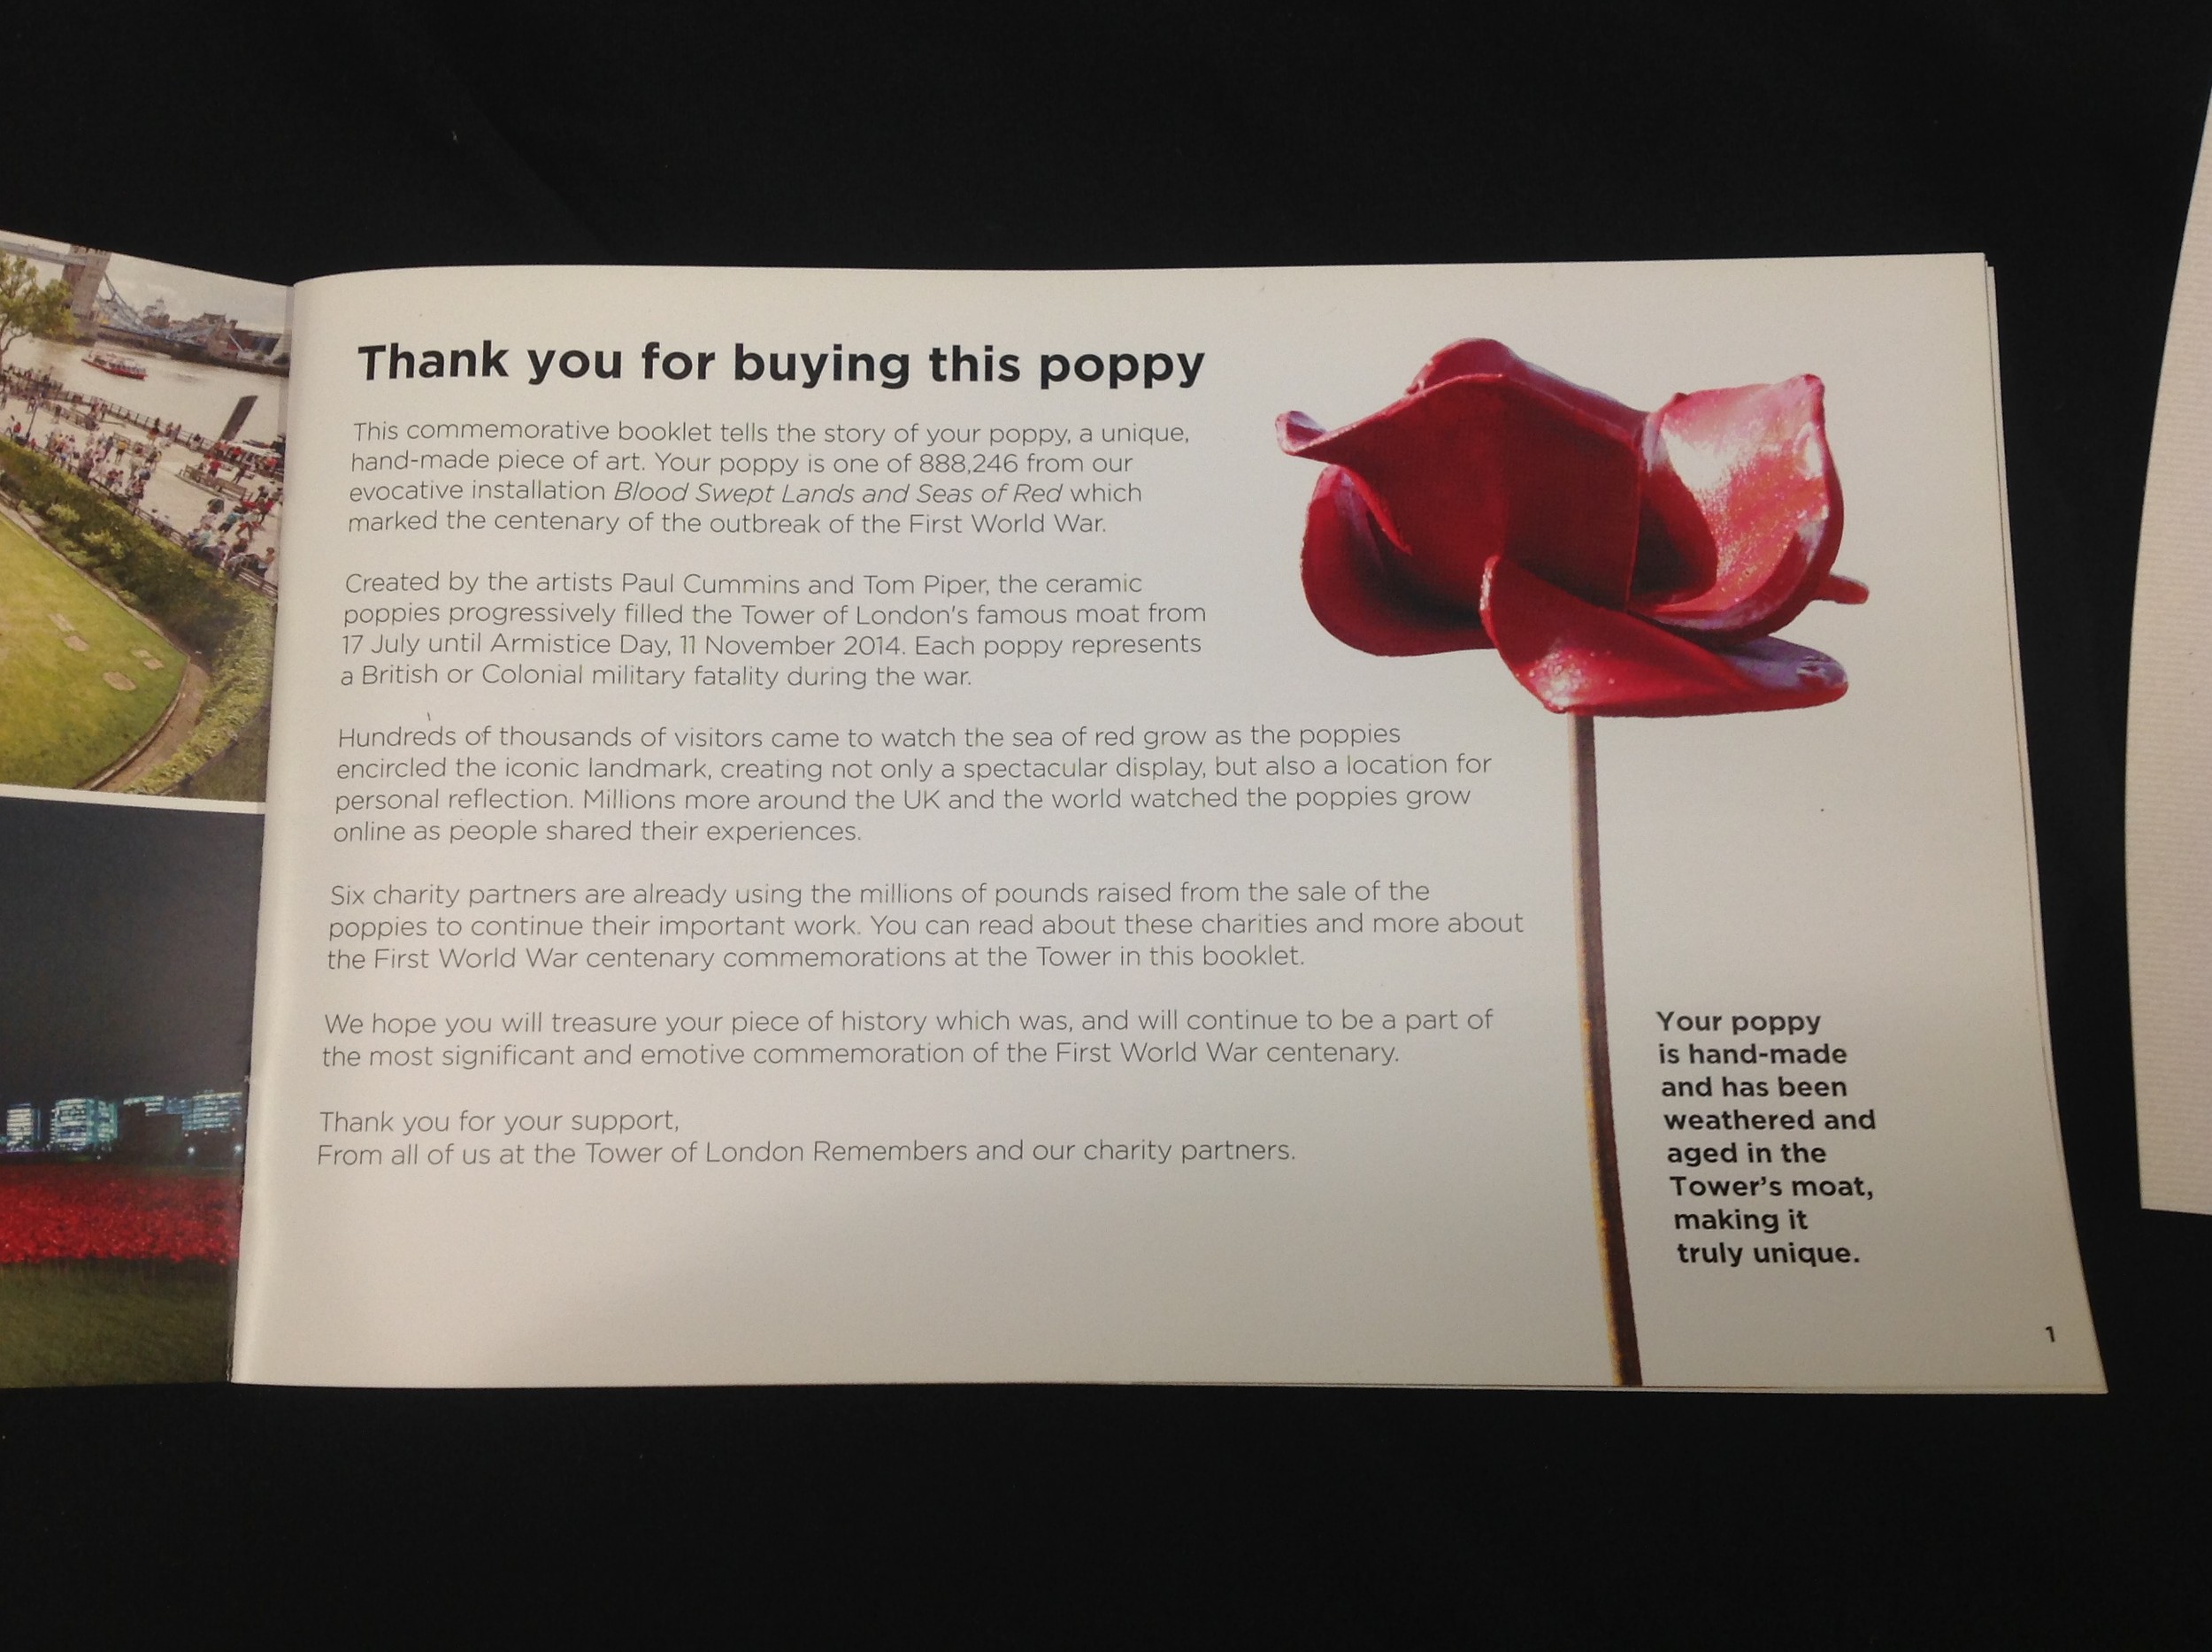 A Royal British Legion Centenary ceramic poppy by Paul Cummins made for the art installation at - Image 6 of 7